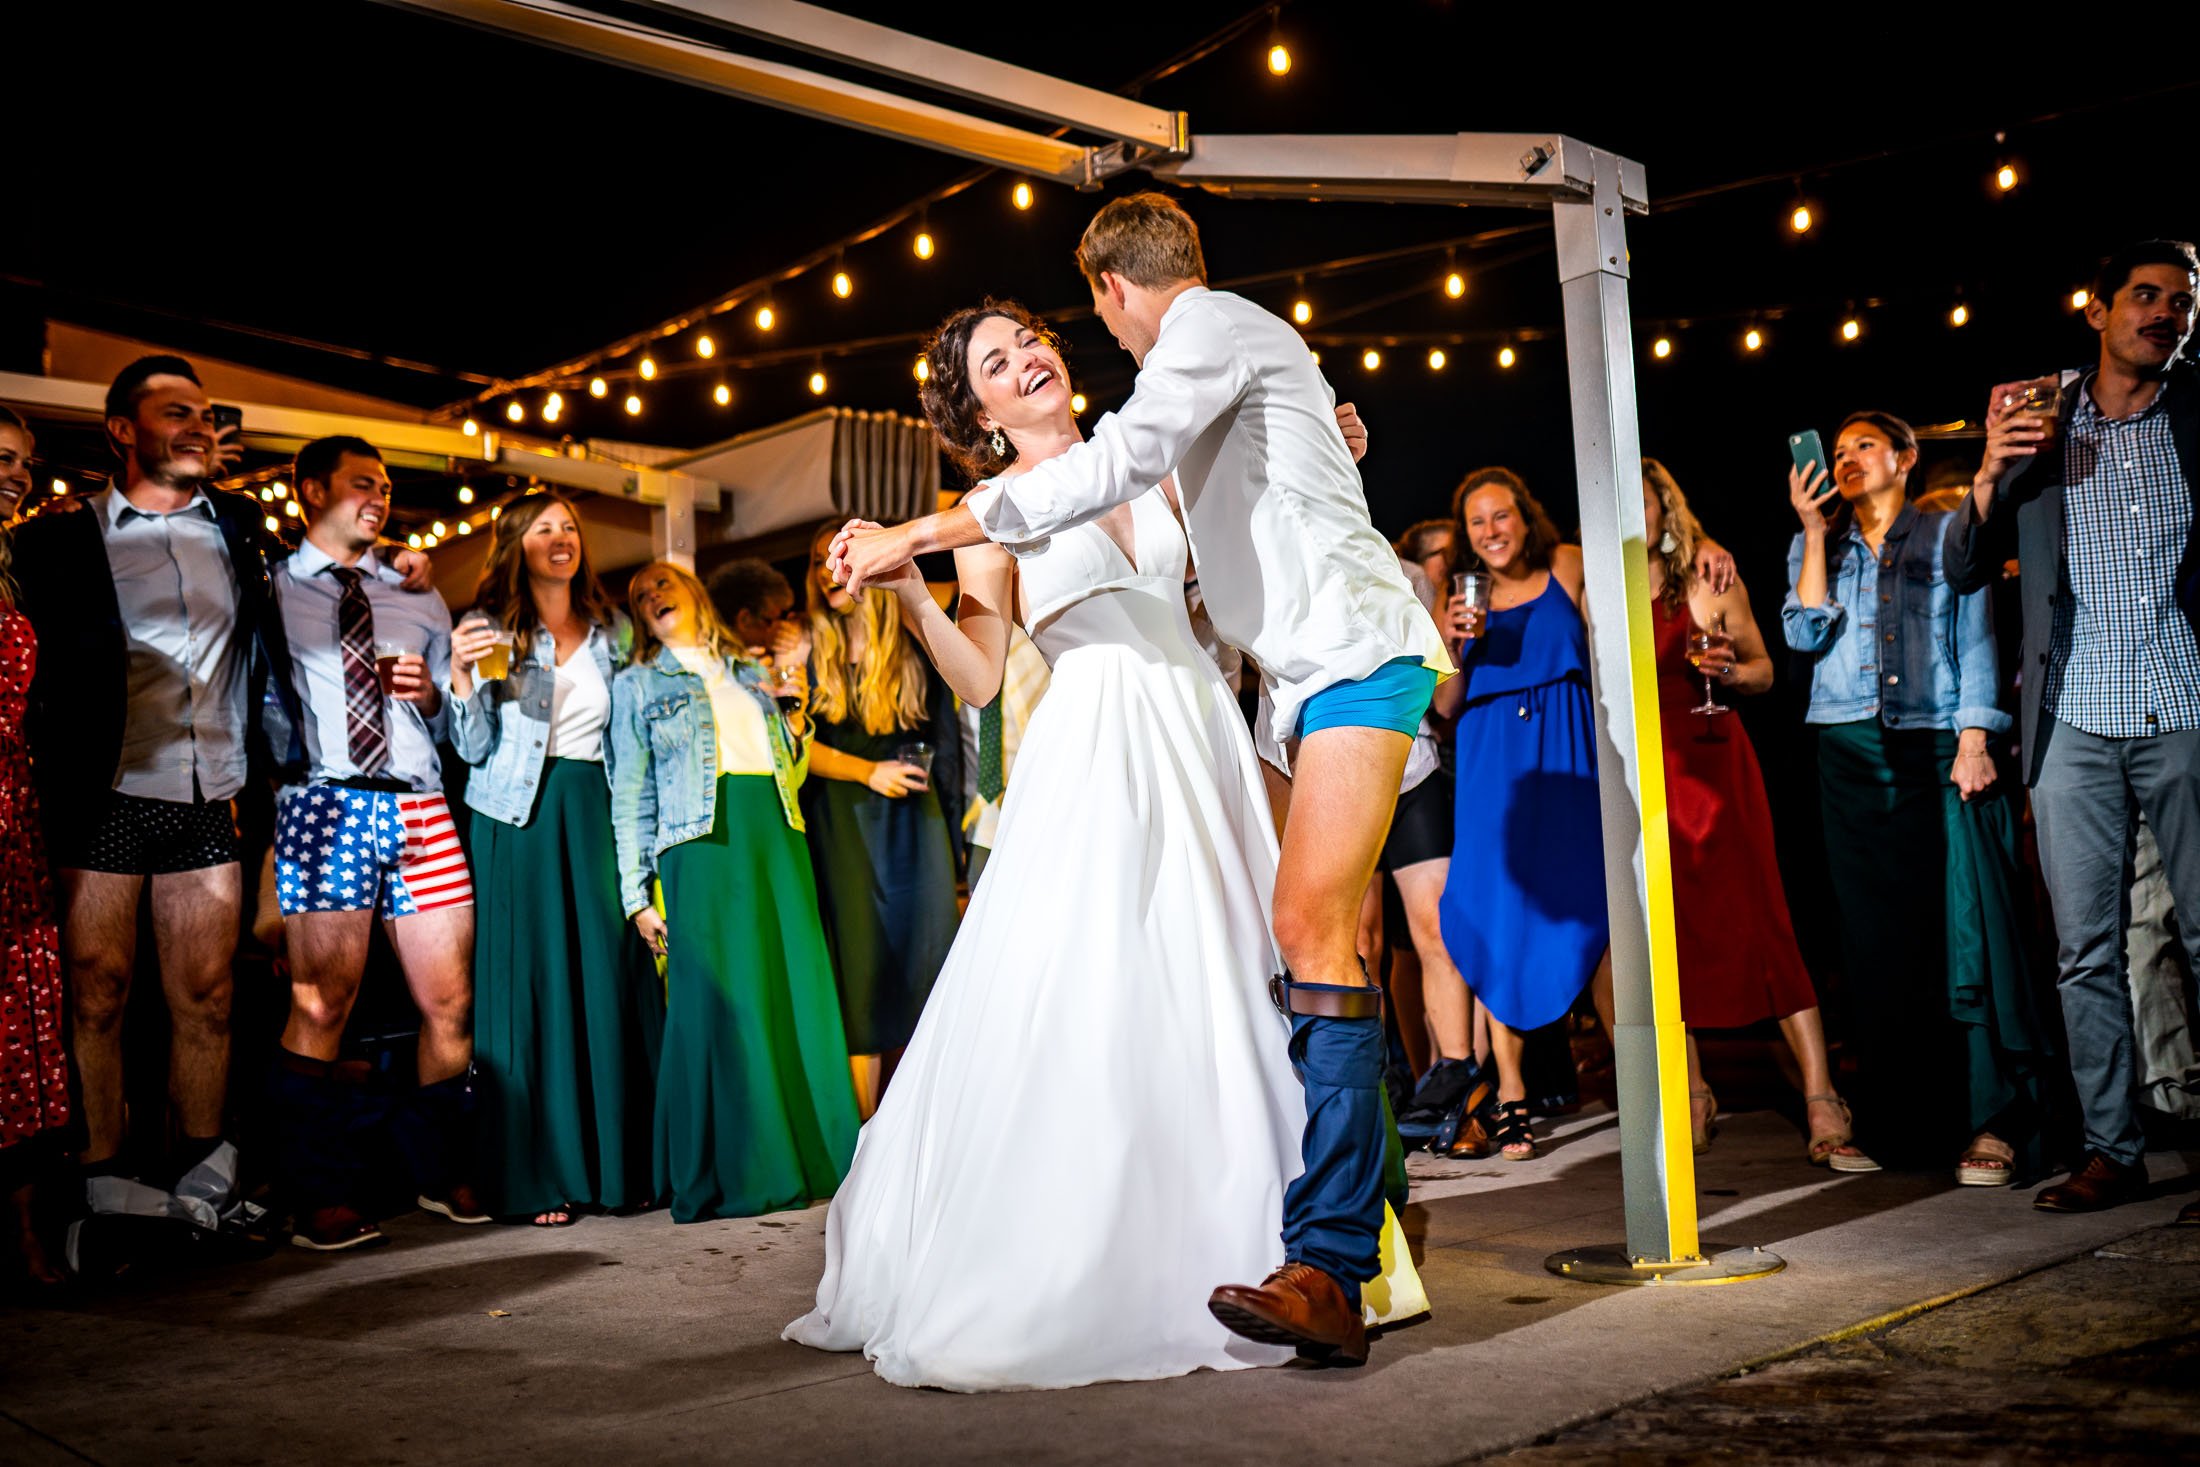 Bride and groom dance together while groom is wearing only his boxers on the outdoor patio under cafe lights during the wedding reception, wedding, wedding photos, wedding photography, wedding photographer, wedding inspiration, wedding photo inspiration, wedding portraits, wedding ceremony, wedding reception, mountain wedding, Catholic Church wedding, Catholic Church wedding photos, Catholic Church wedding photography, Catholic Church wedding photographer, Catholic Church wedding inspiration, Catholic Church wedding venue, Steamboat Springs wedding, Steamboat Springs wedding photos, Steamboat Springs wedding photography, Steamboat Springs wedding photographer, Colorado wedding, Colorado wedding photos, Colorado wedding photography, Colorado wedding photographer, Colorado mountain wedding, Colorado wedding inspiration